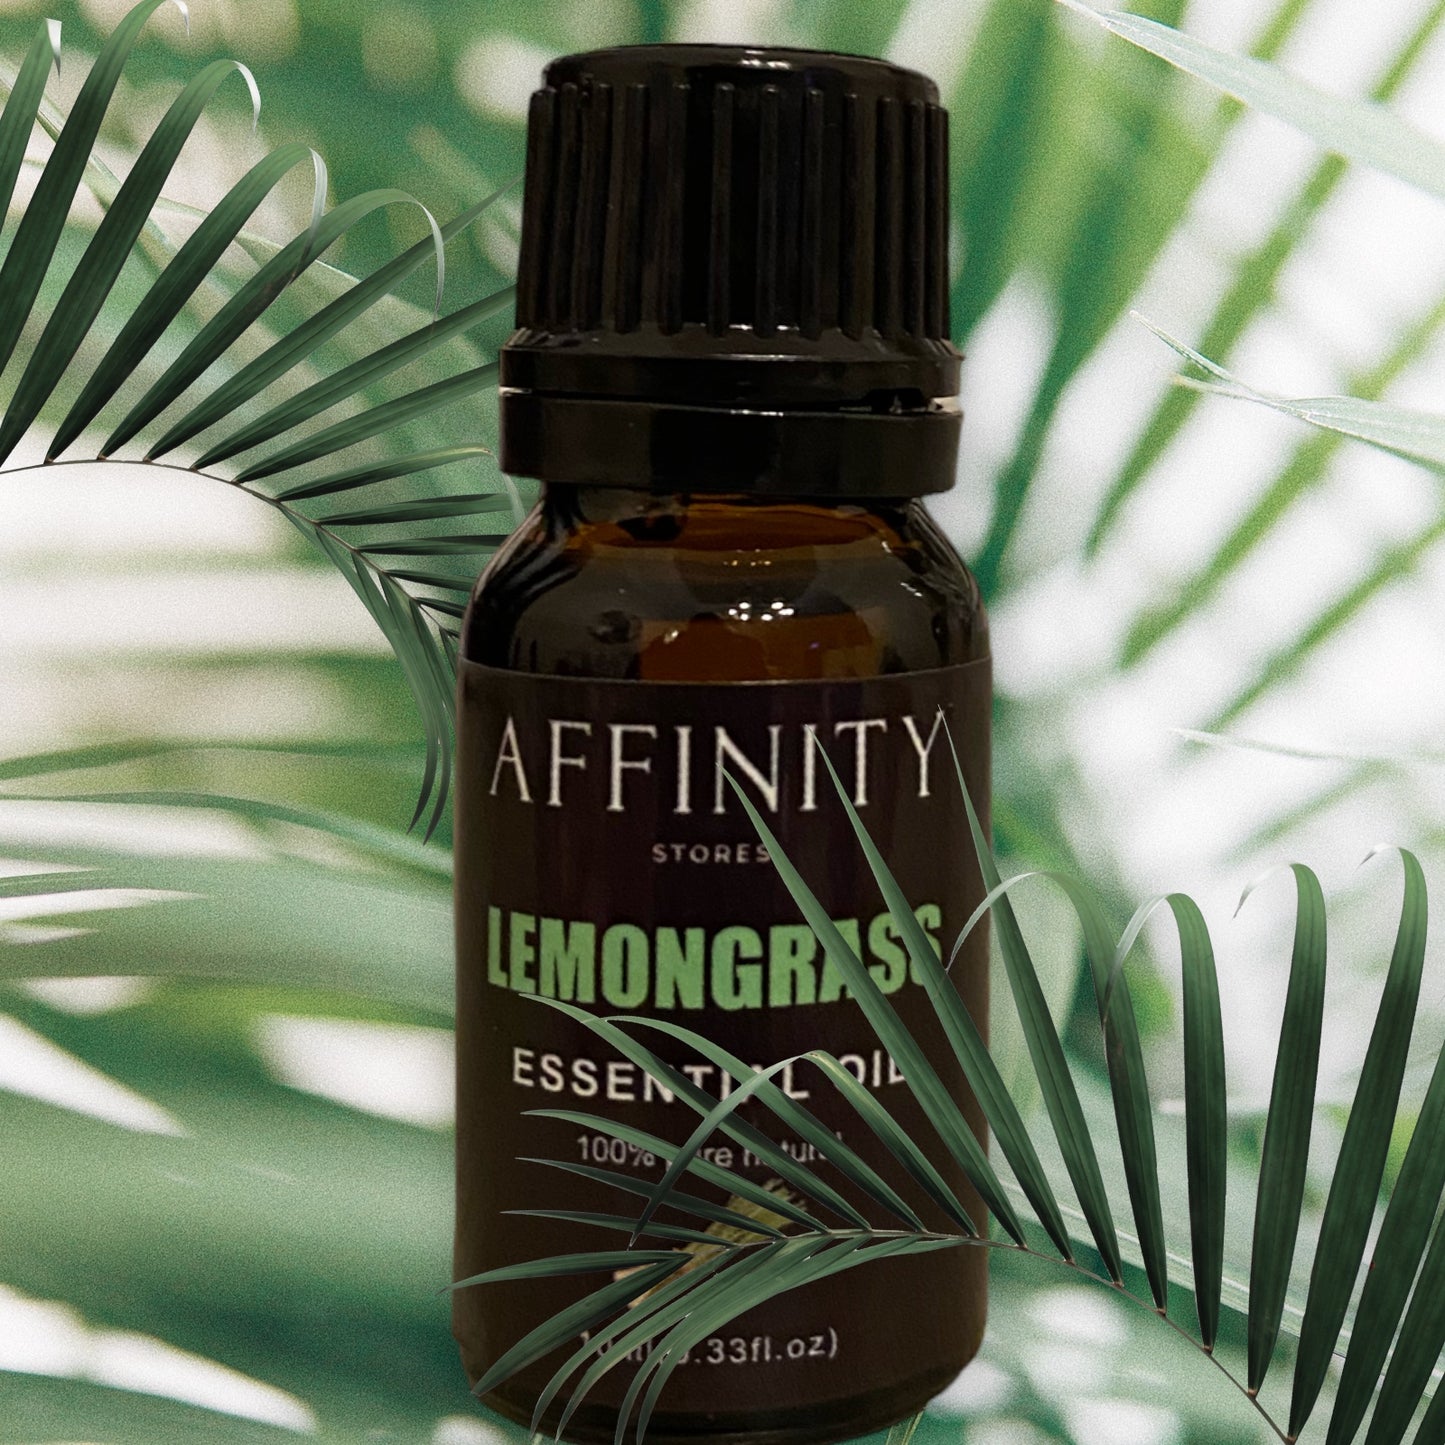 Lemongrass Essential Oil - 100% Pure Organic Natural Undiluted for Aromatherapy Diffuser